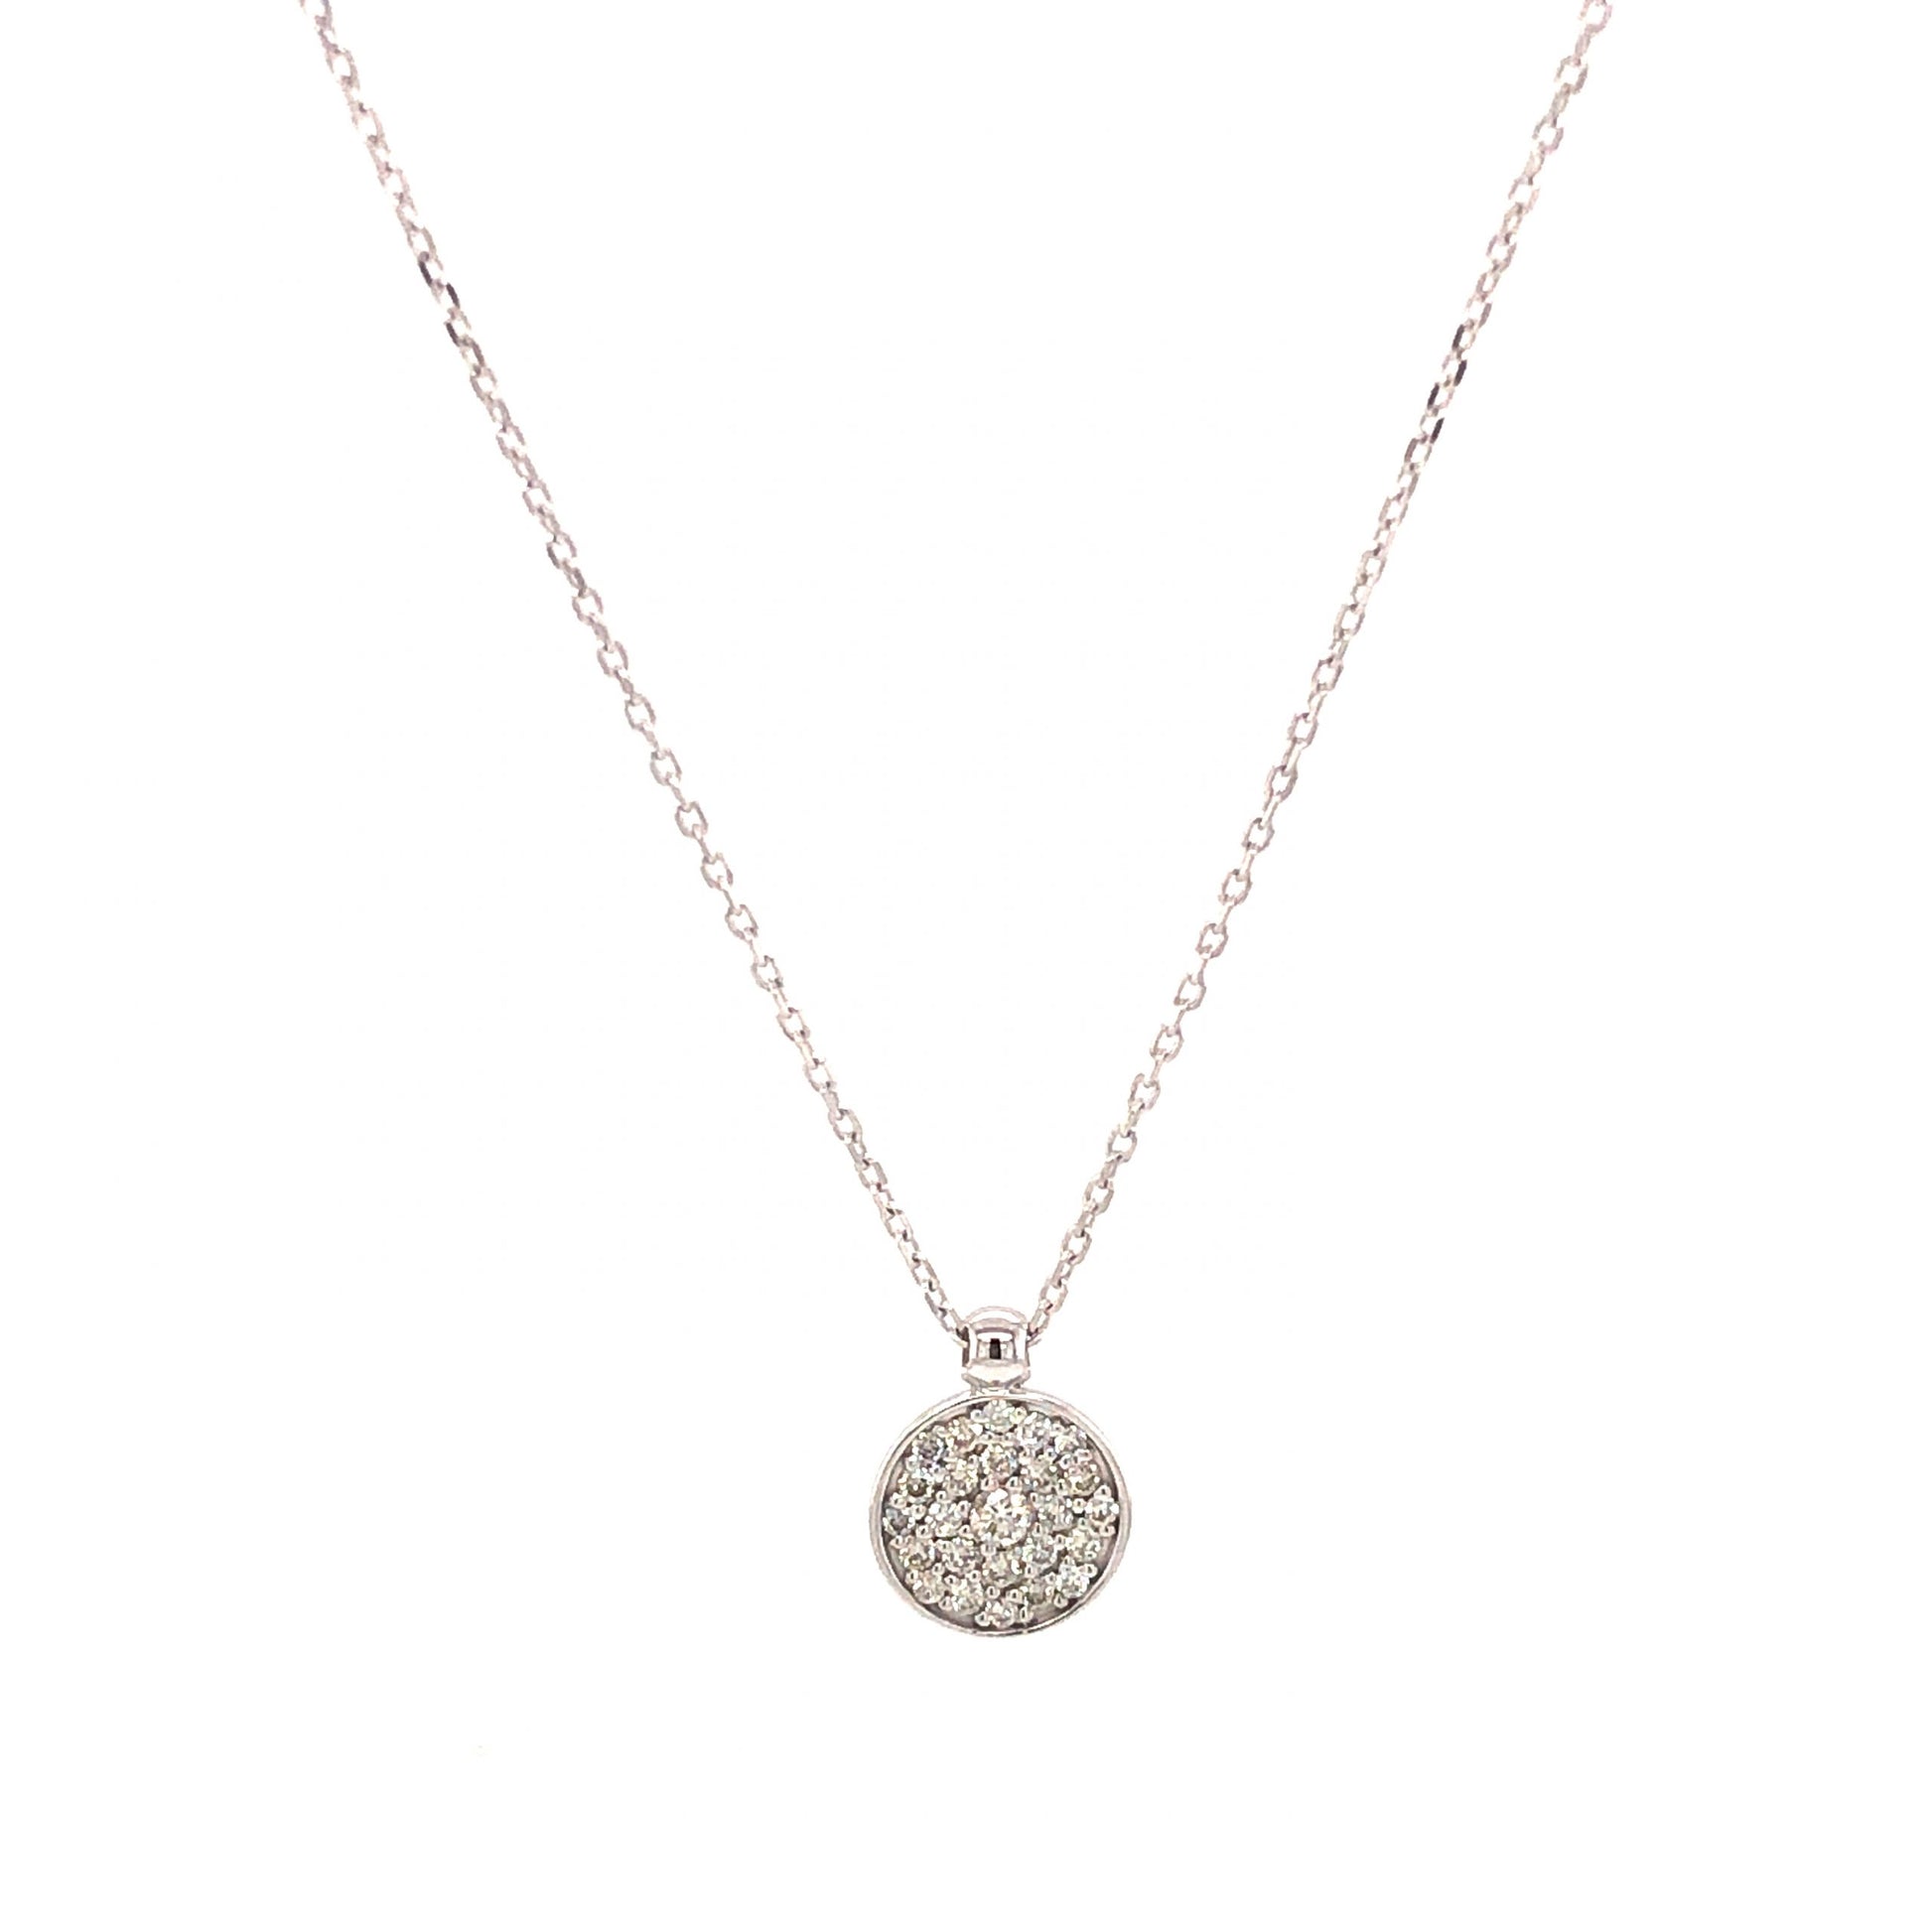 .25 Pave Diamond Pendant Necklace in 14k White Gold